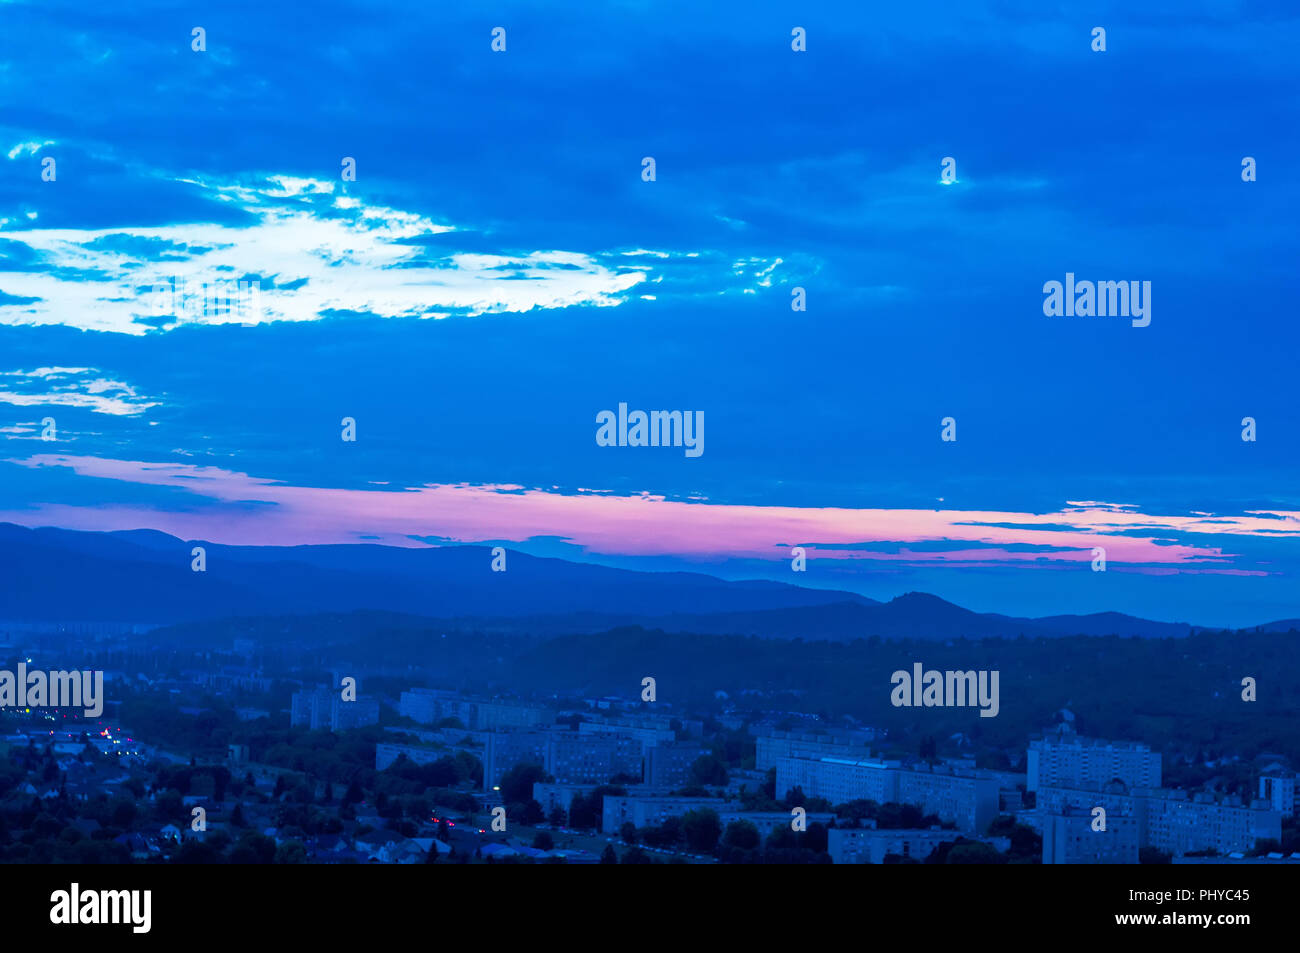 Colorful landscape view over Miskolc, Hungary, Europe at night. Stock Photo